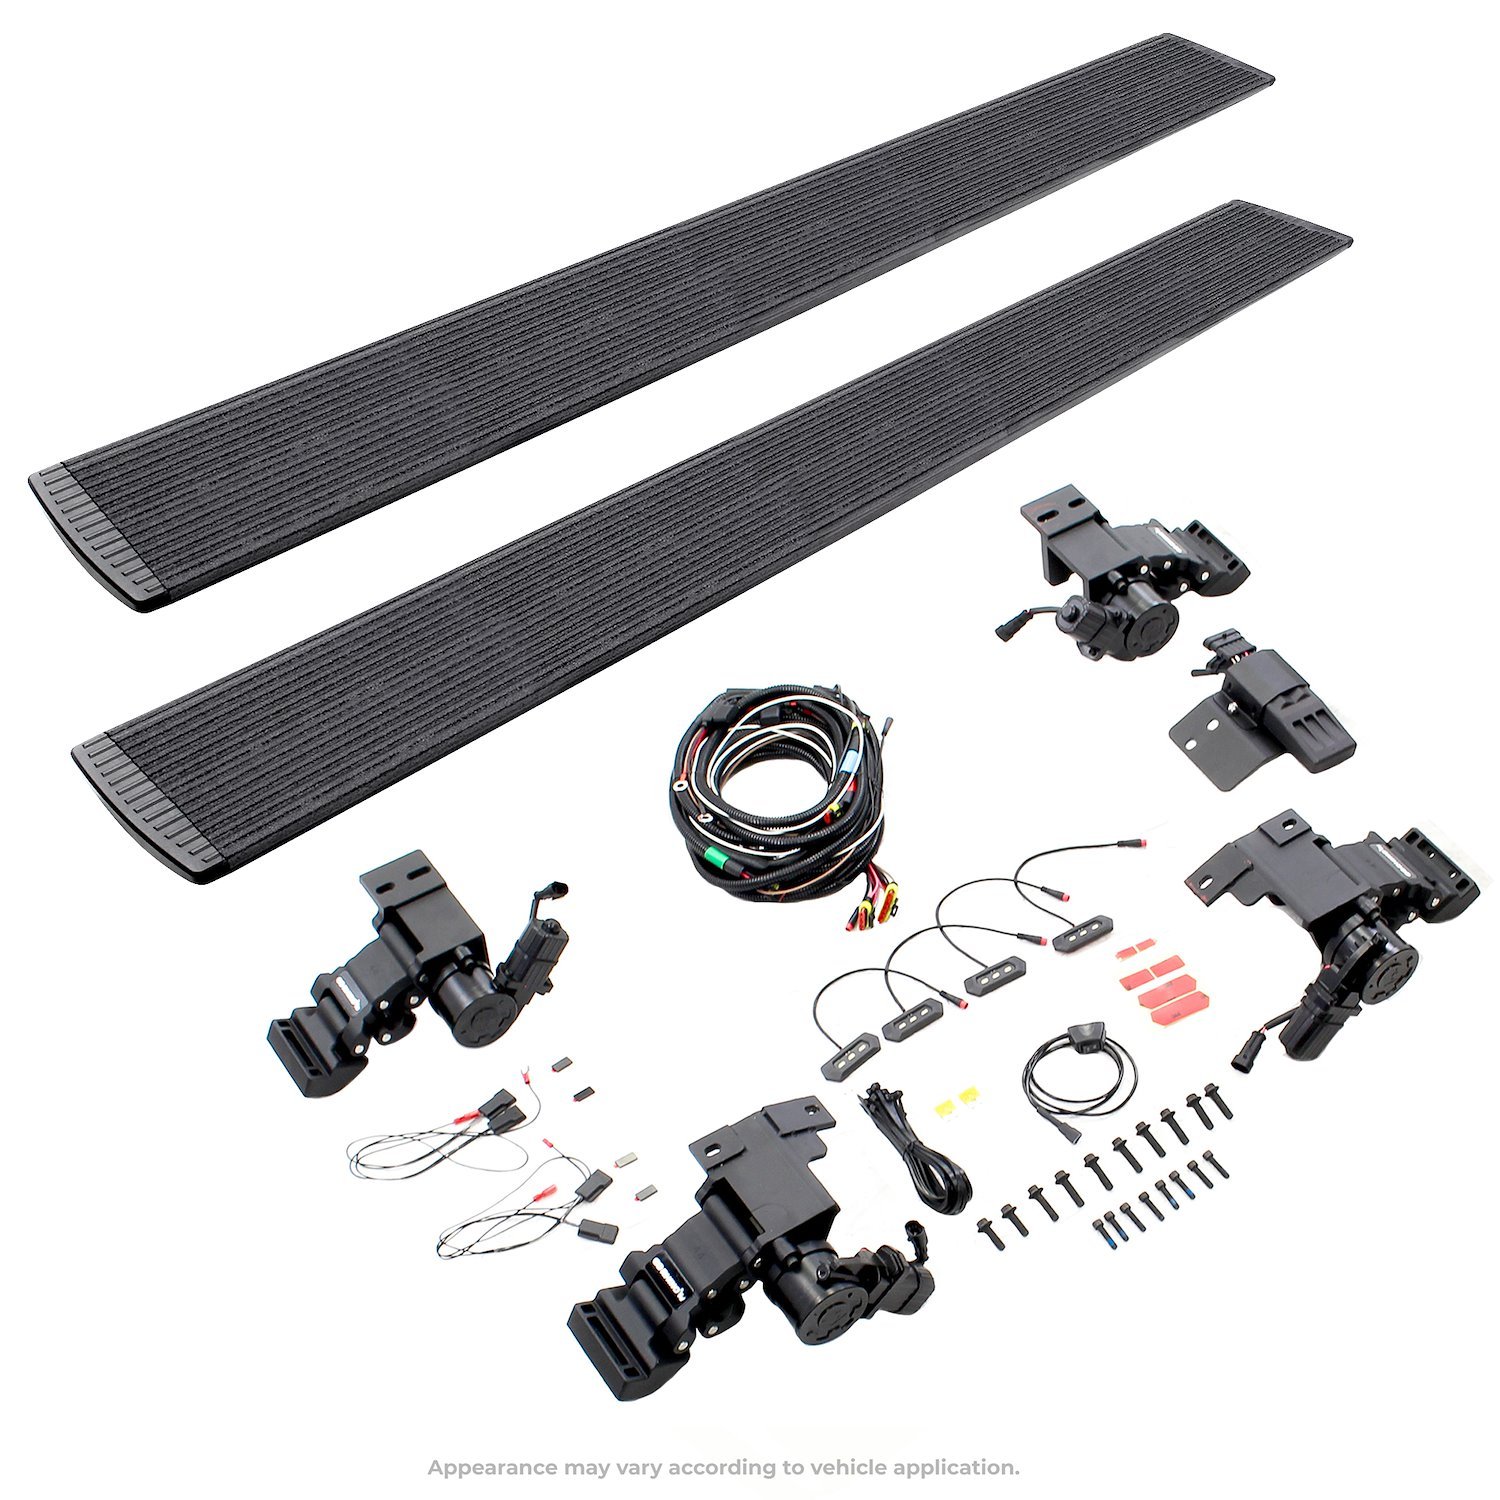 E1 Electric Running Board Kit Fits Select GMC Sierra 3500 HD Extended Cab Pickup